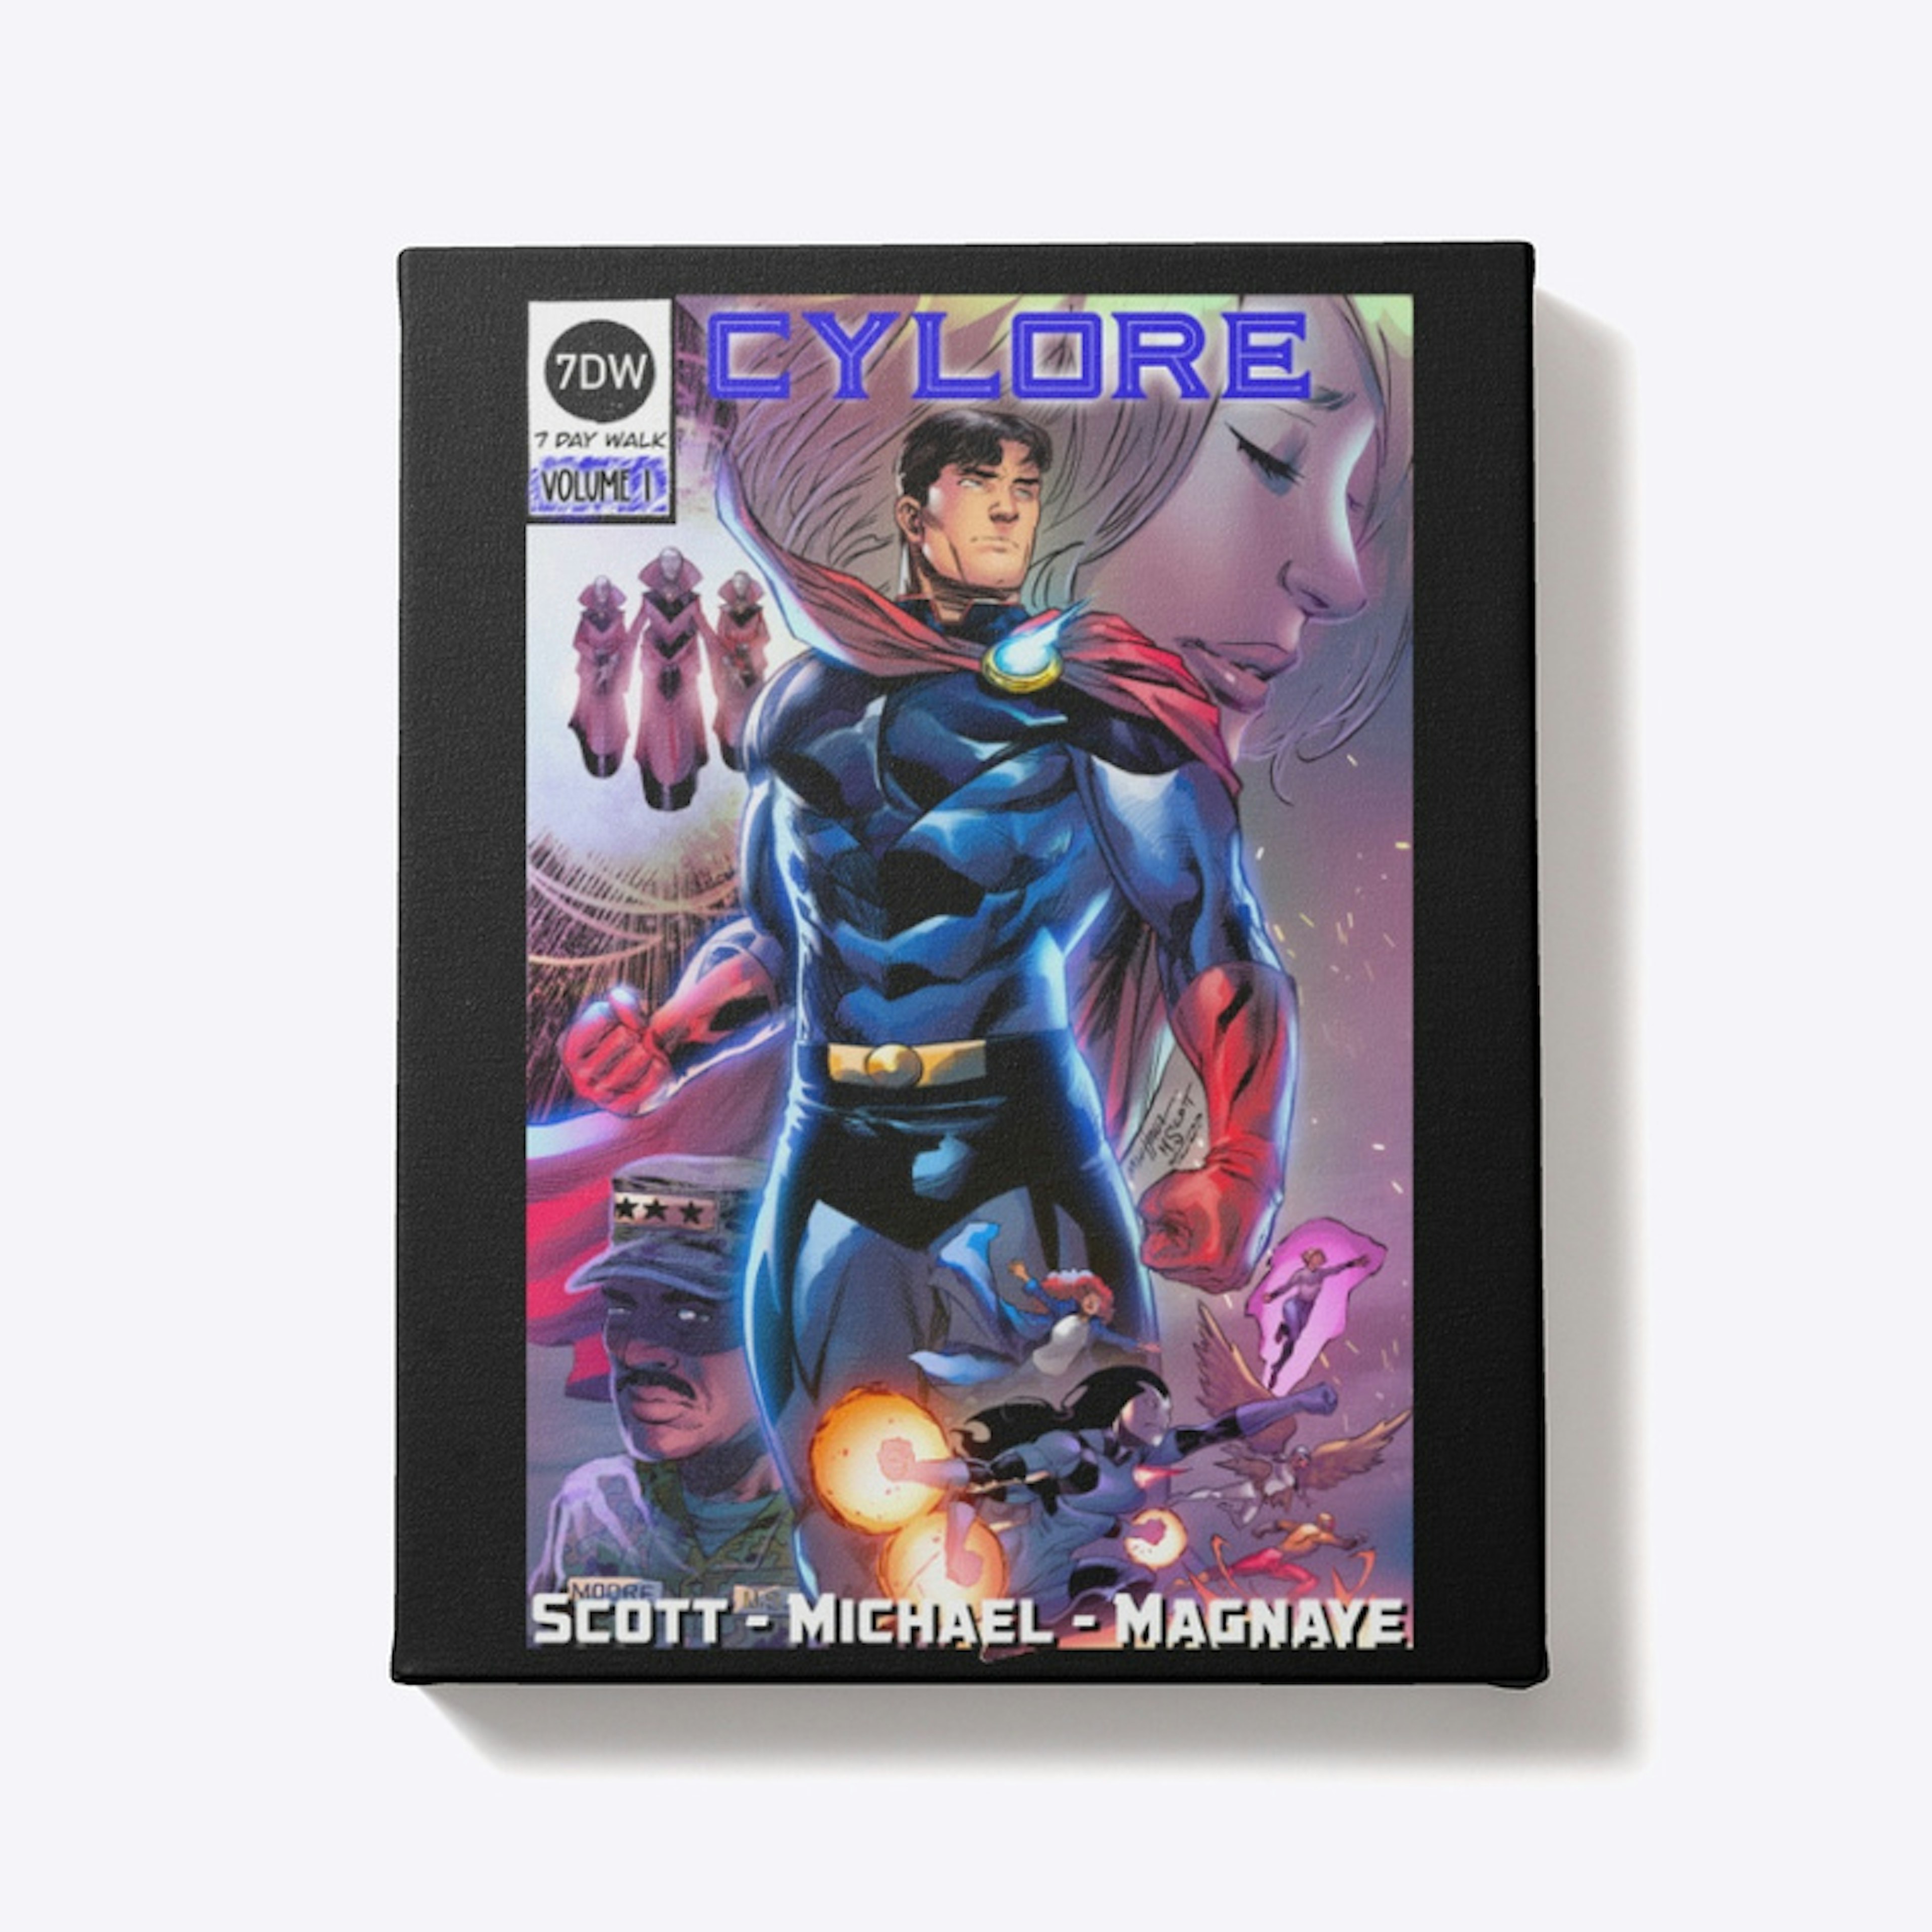 Cylore Graphic Novel Cover